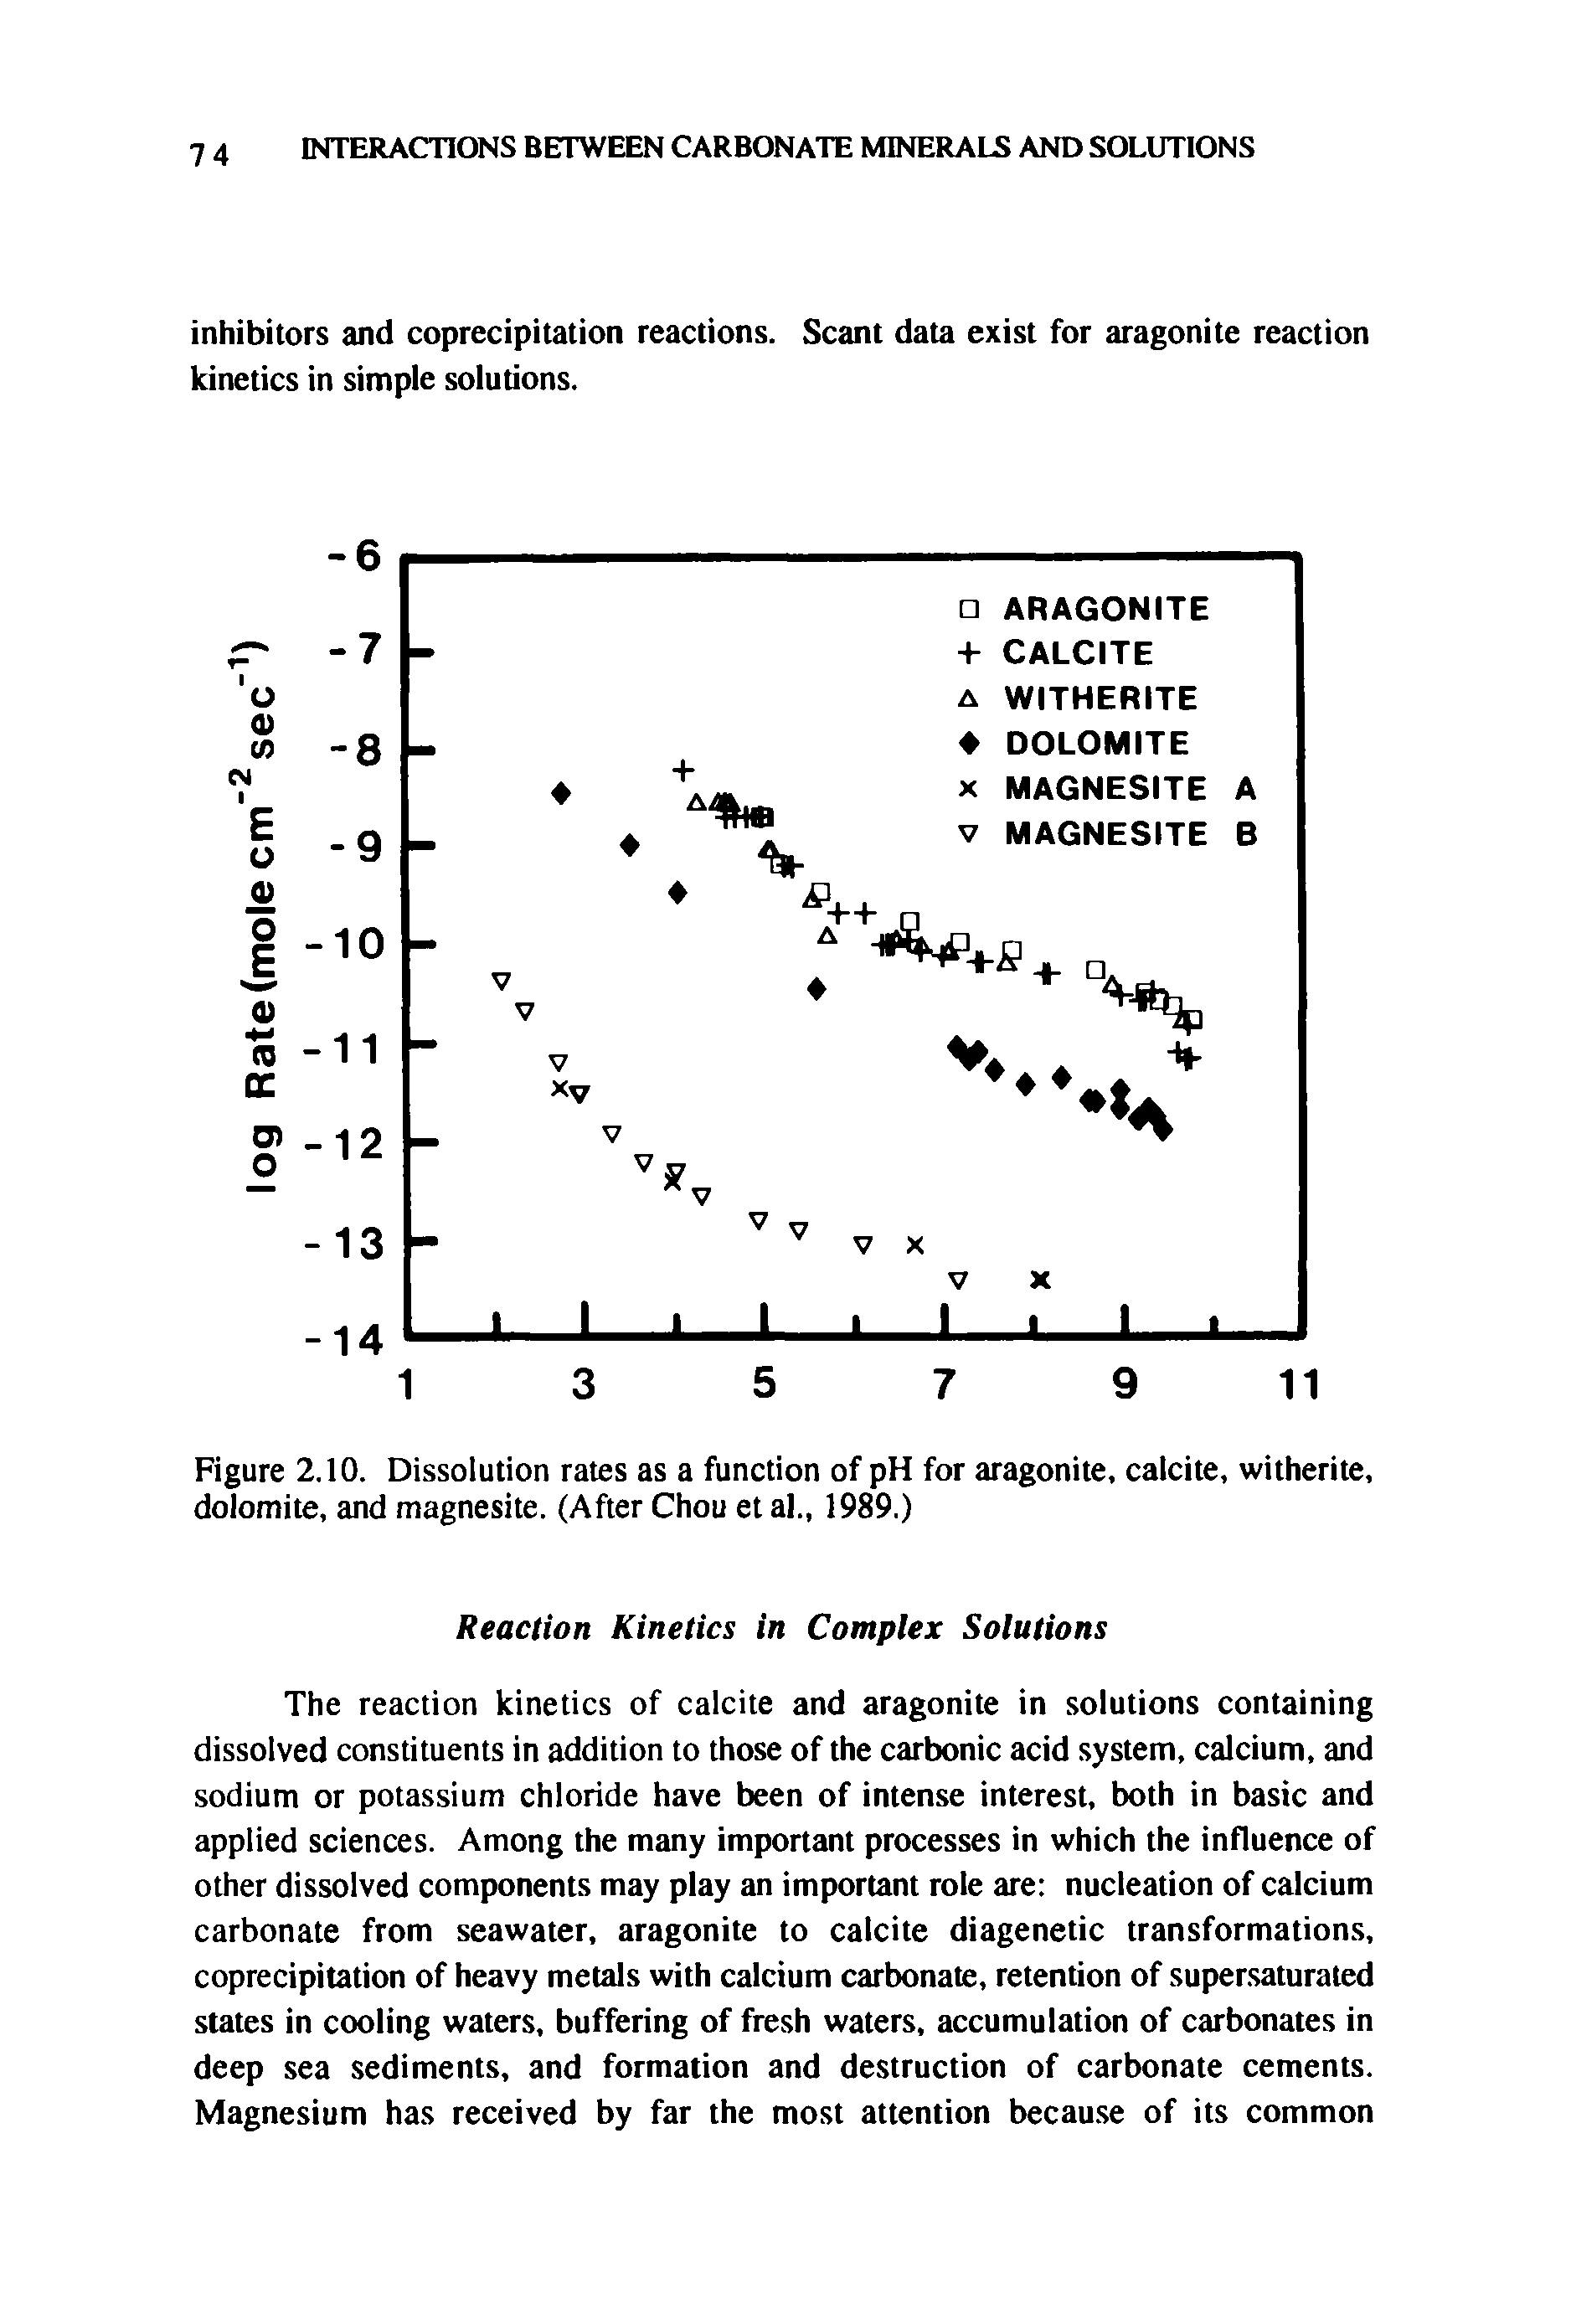 Figure 2.10. Dissolution rates as a function of pH for aragonite, calcite, witherite, dolomite, and magnesite. (After Chou et al., 1989.)...